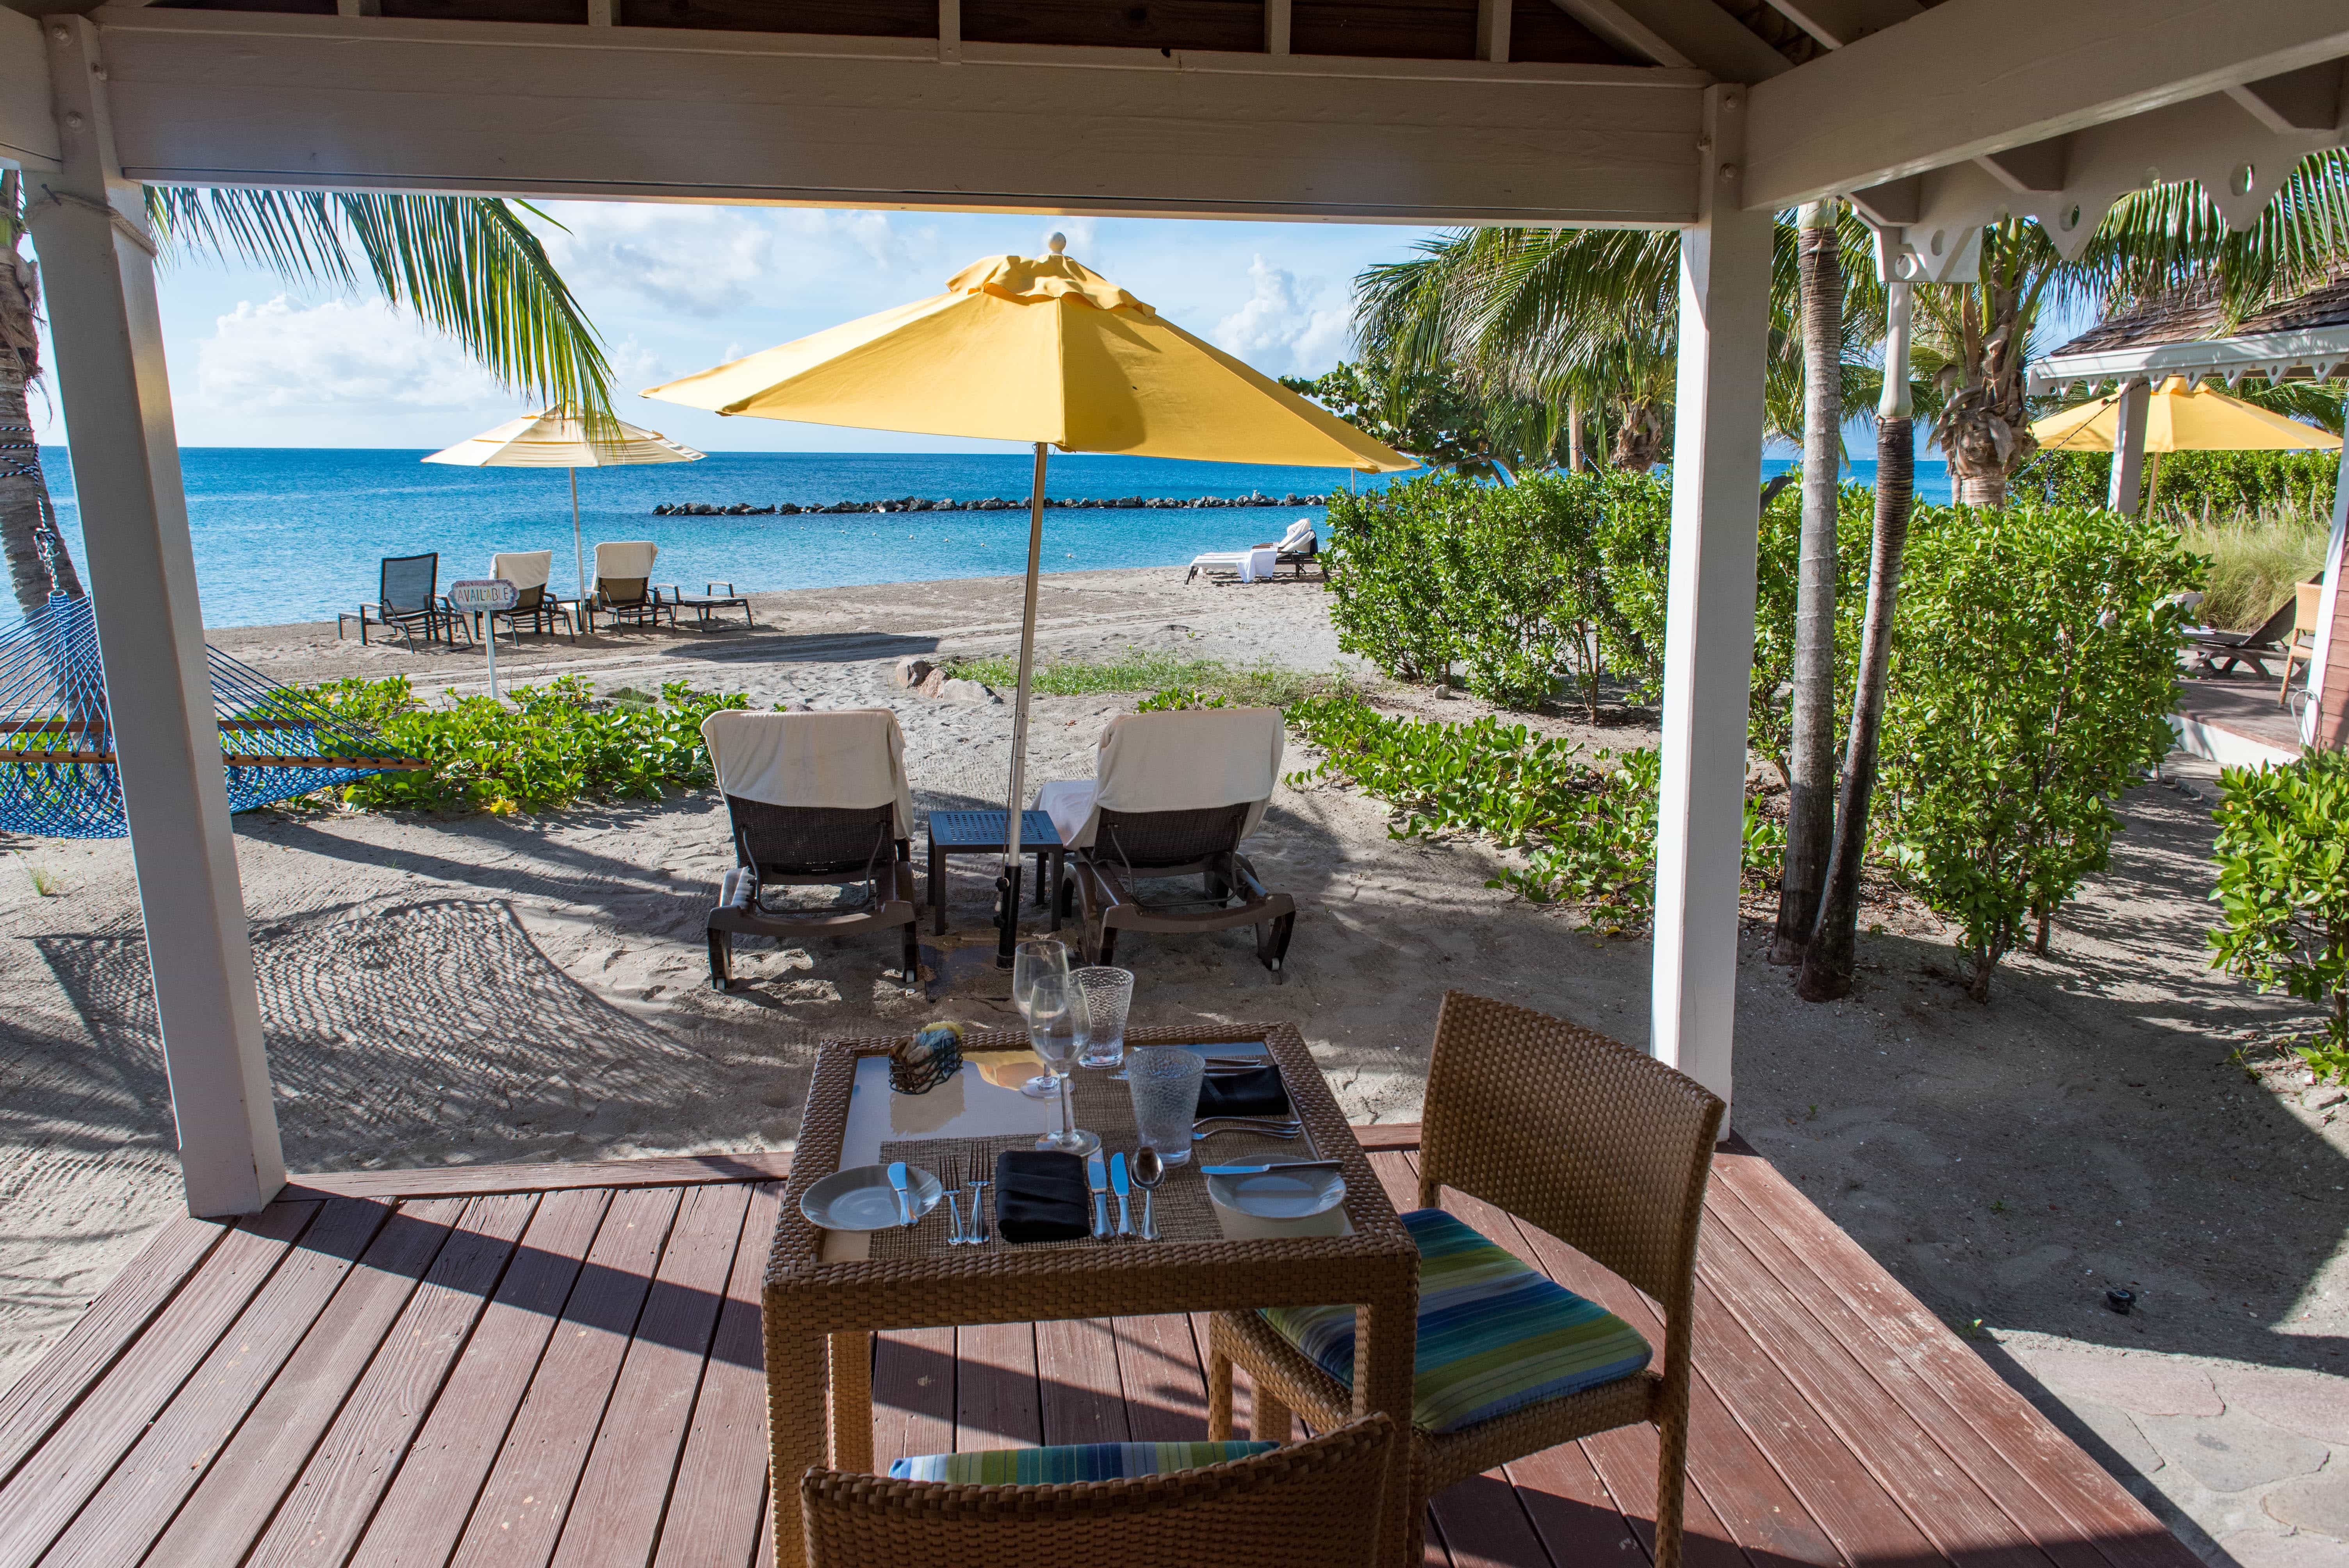 For even more beach, cabanas are available for guests to reserve their own private time on the sand.